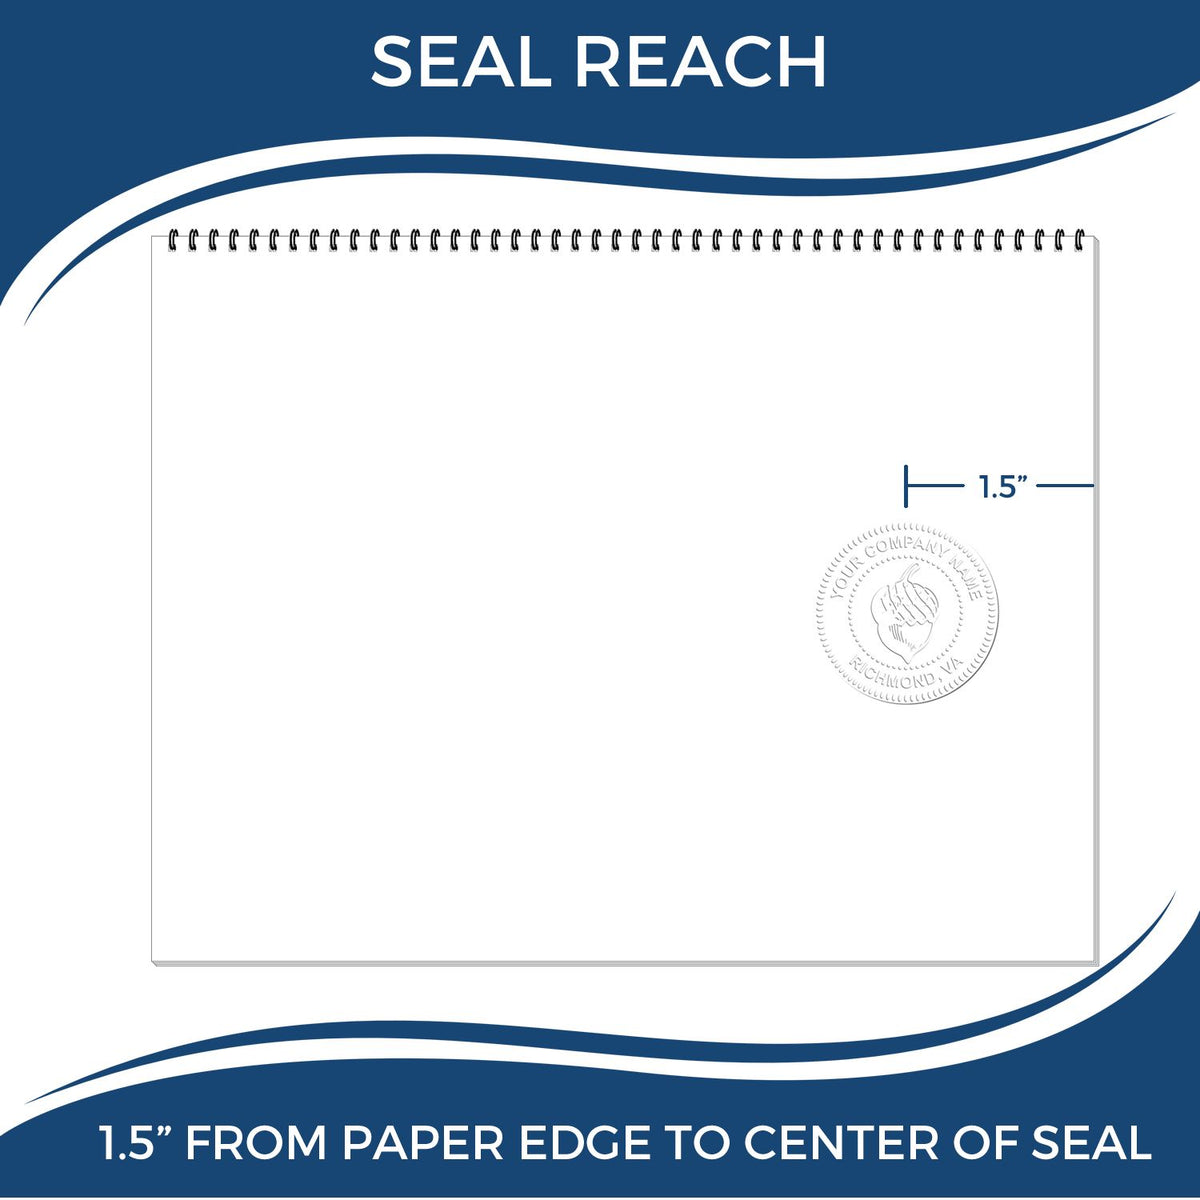 An infographic showing the seal reach which is represented by a ruler and a miniature seal image of the Gift West Virginia Landscape Architect Seal